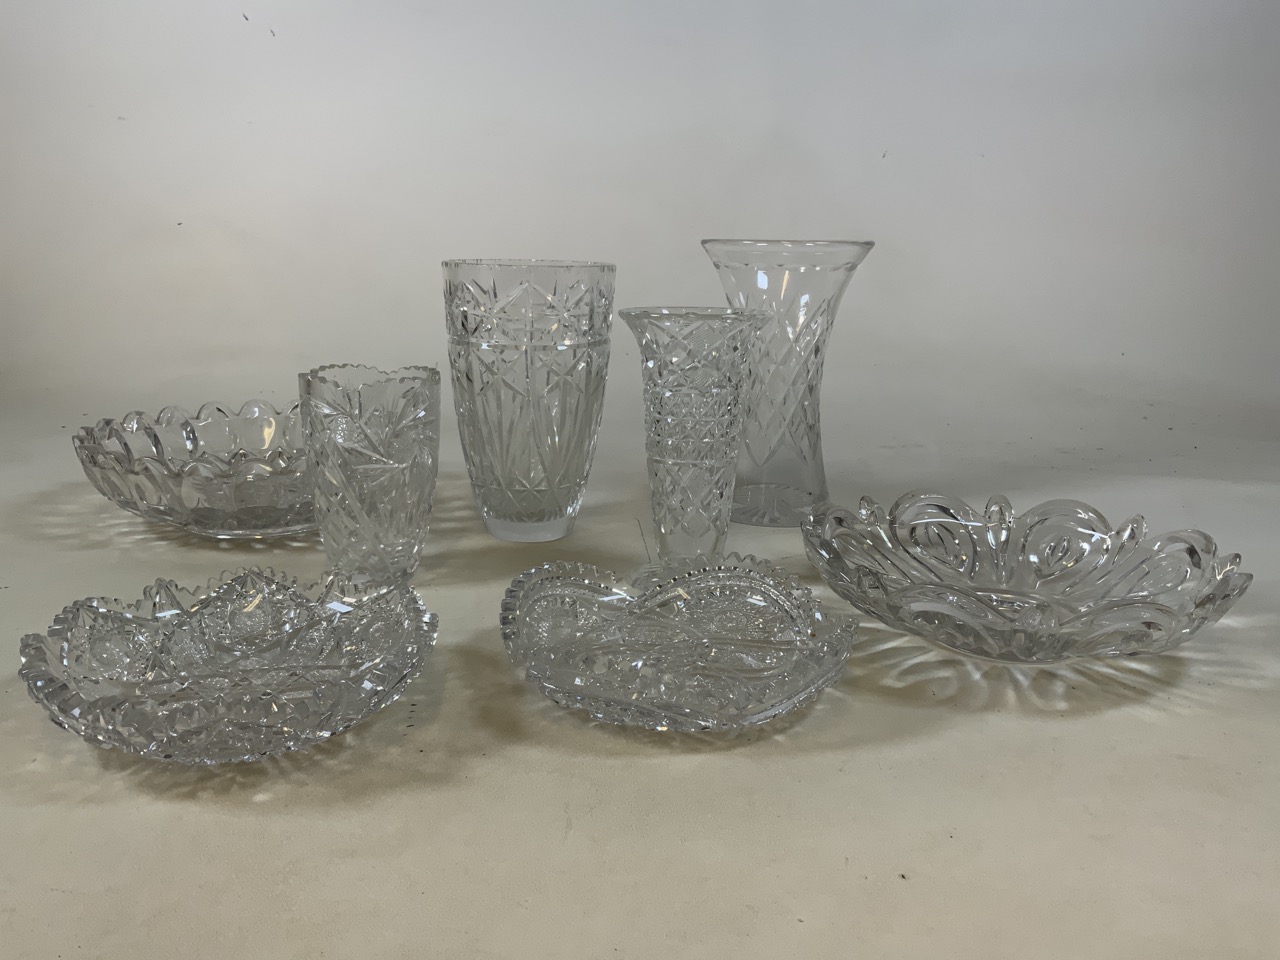 A collection of cut and moulded glass including two strawberry bowls, vases and large bowls